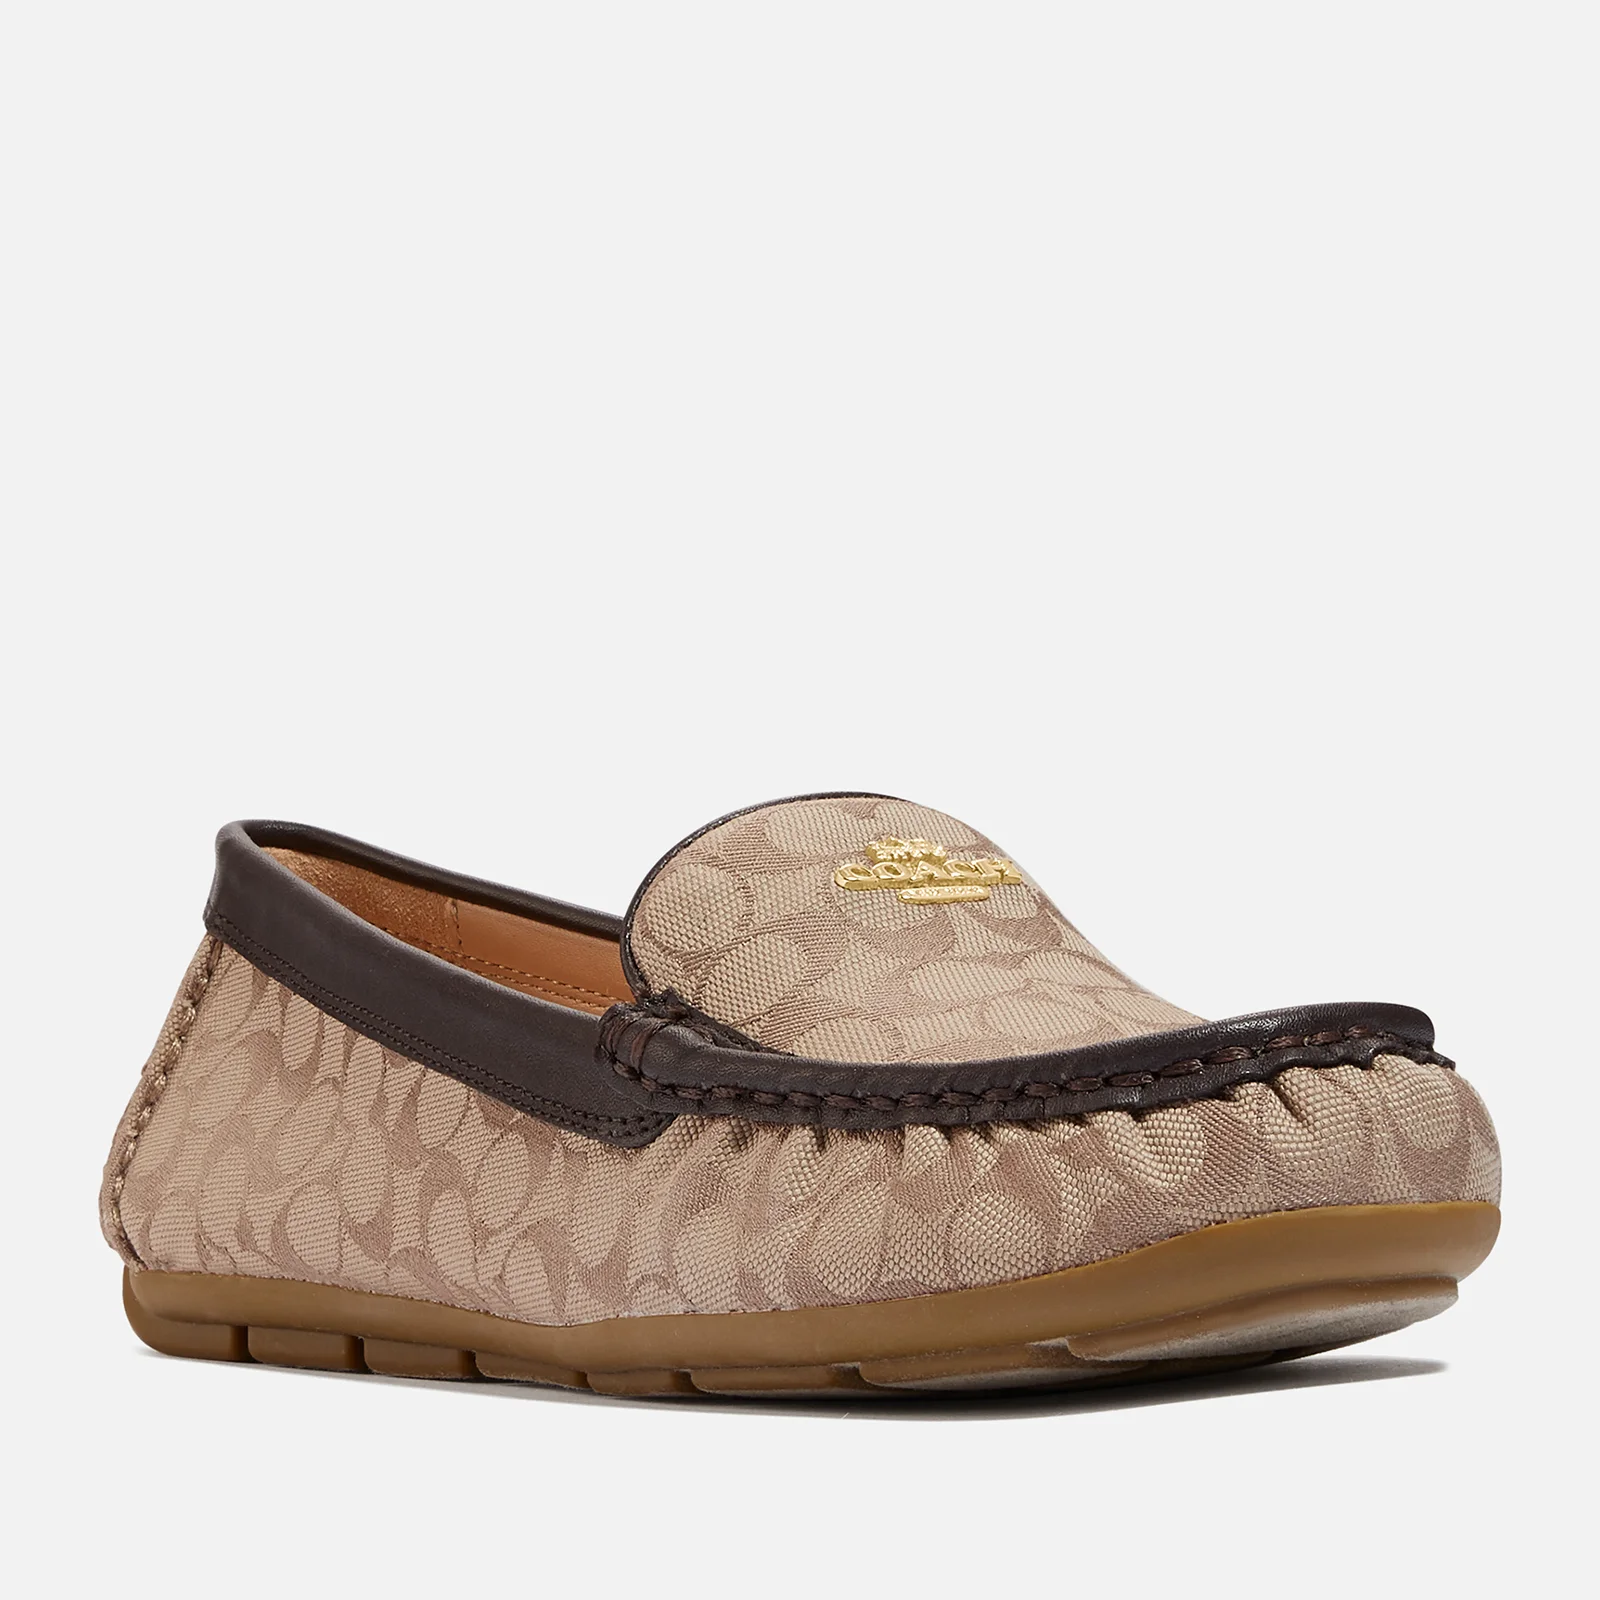 Coach Women's Marley Jacquard Driving Shoes - Stone Image 1